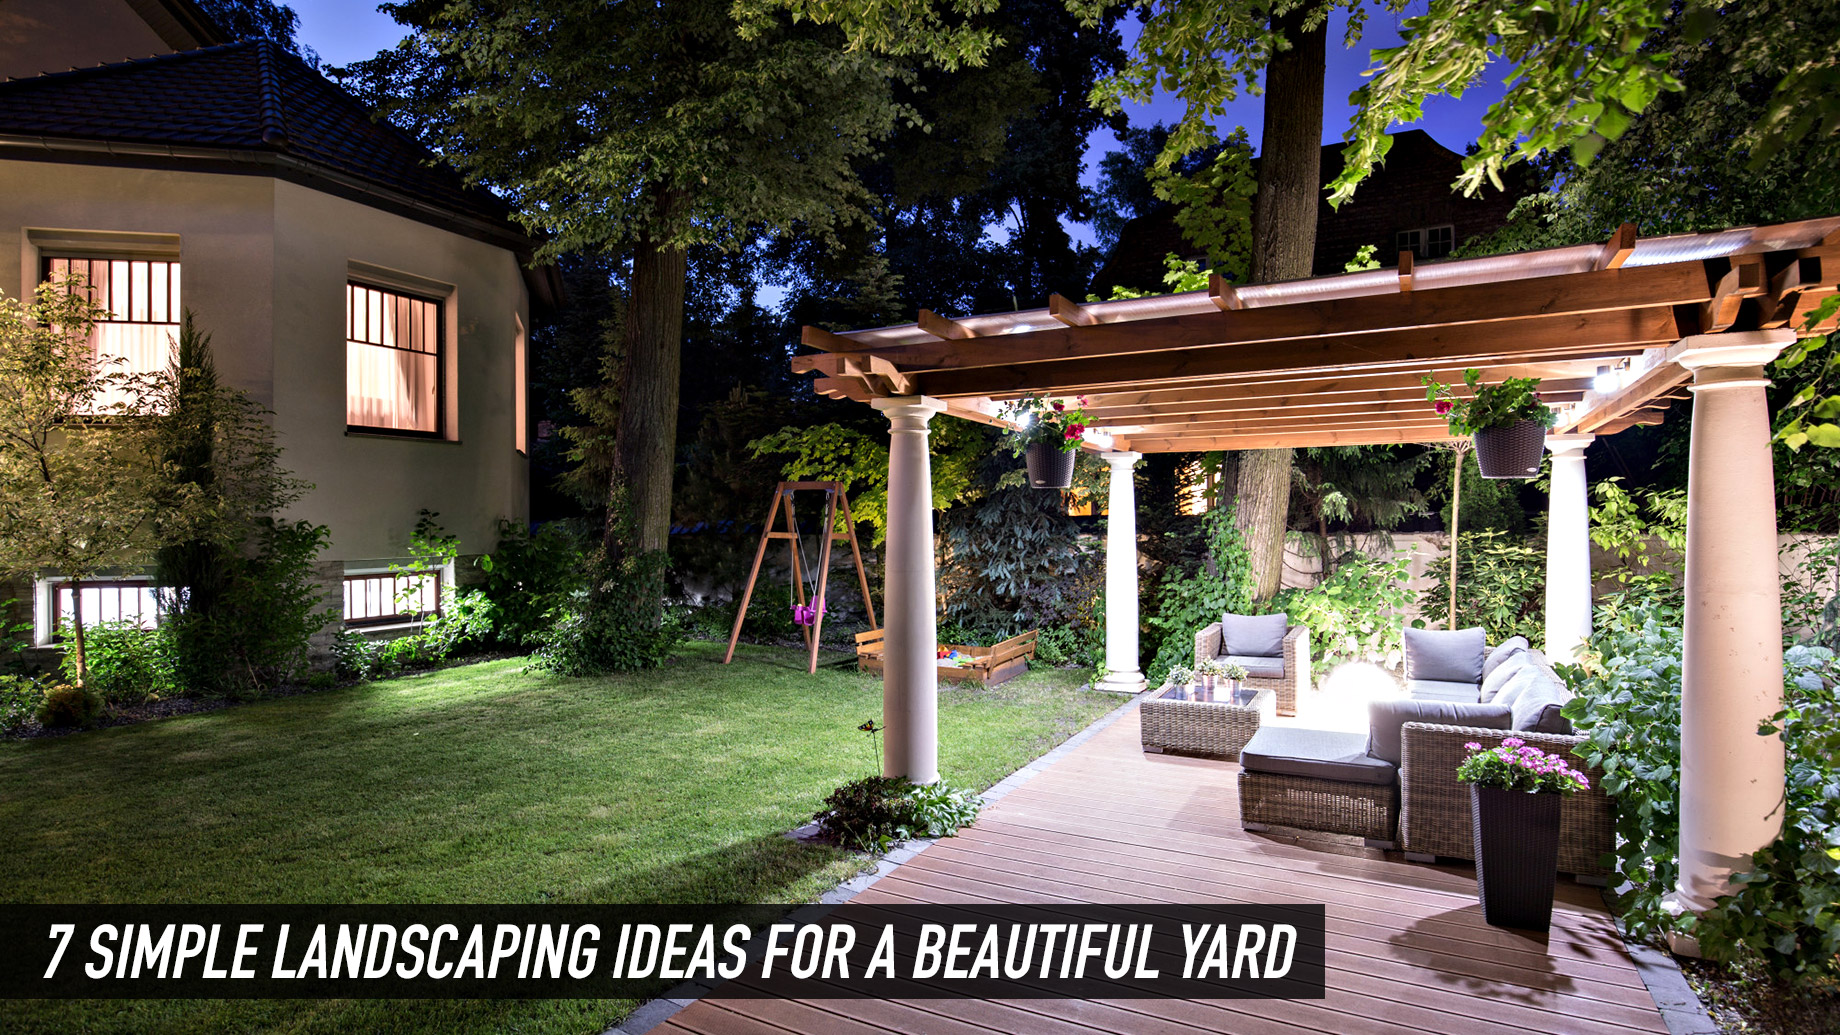 Gorgeous Home - 7 Simple Landscaping Ideas for a Beautiful Yard